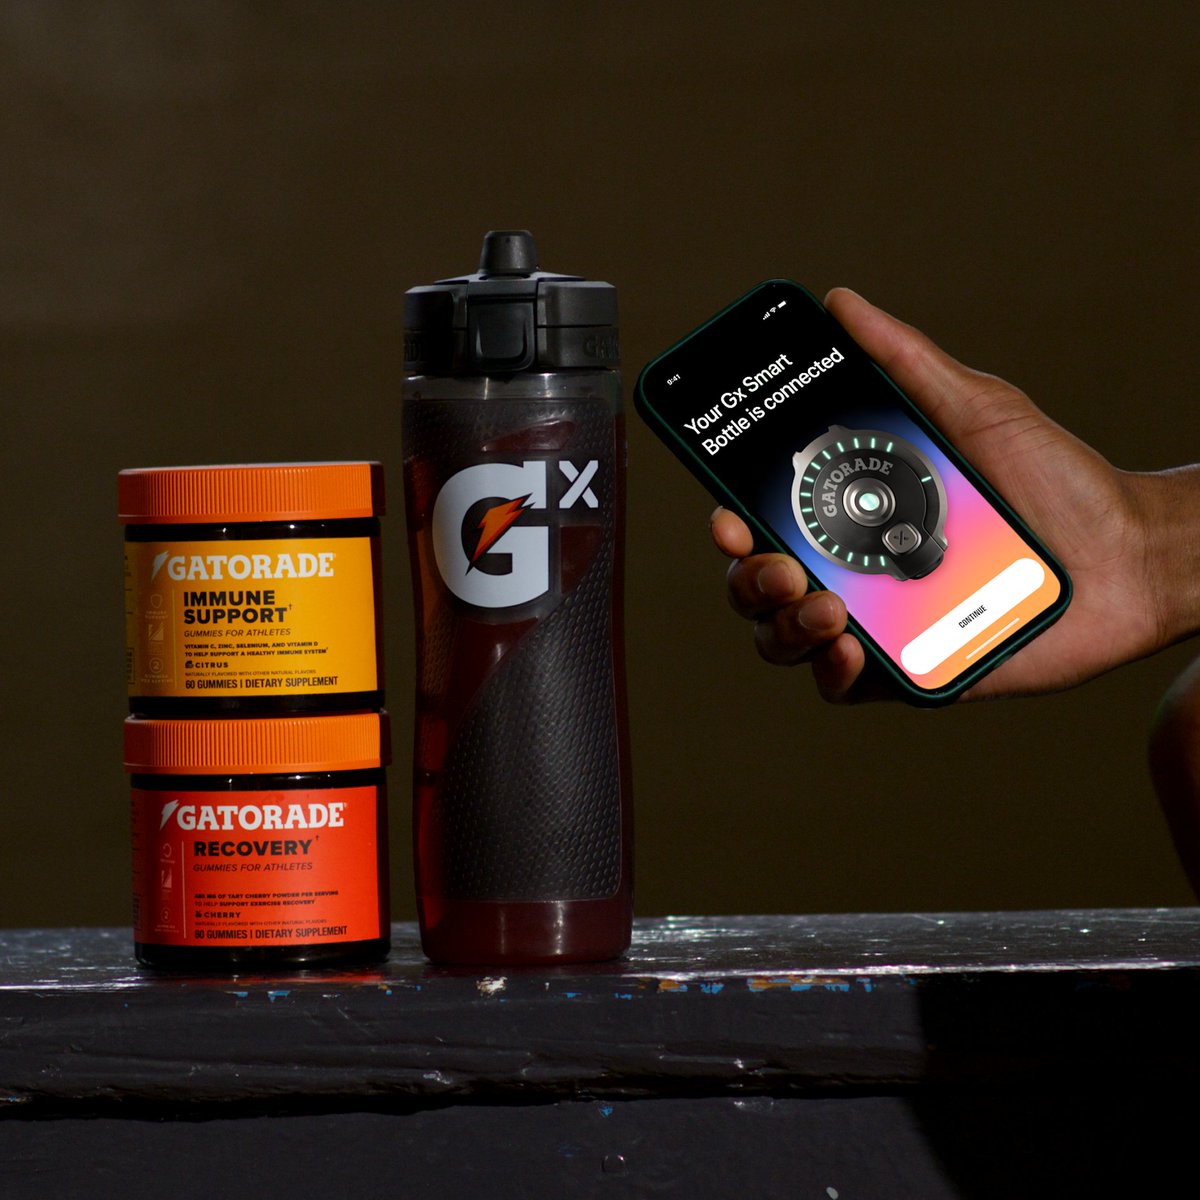 #Innovation is at the core of everything we do. I'm thrilled to share @Gatorade's latest innovations — the improved Gx app, Smart Gx Bottle + Gatorade Gummies. These innovations offer an elevated one-stop-shop experience for all of athletes personalized hydration + fueling needs.